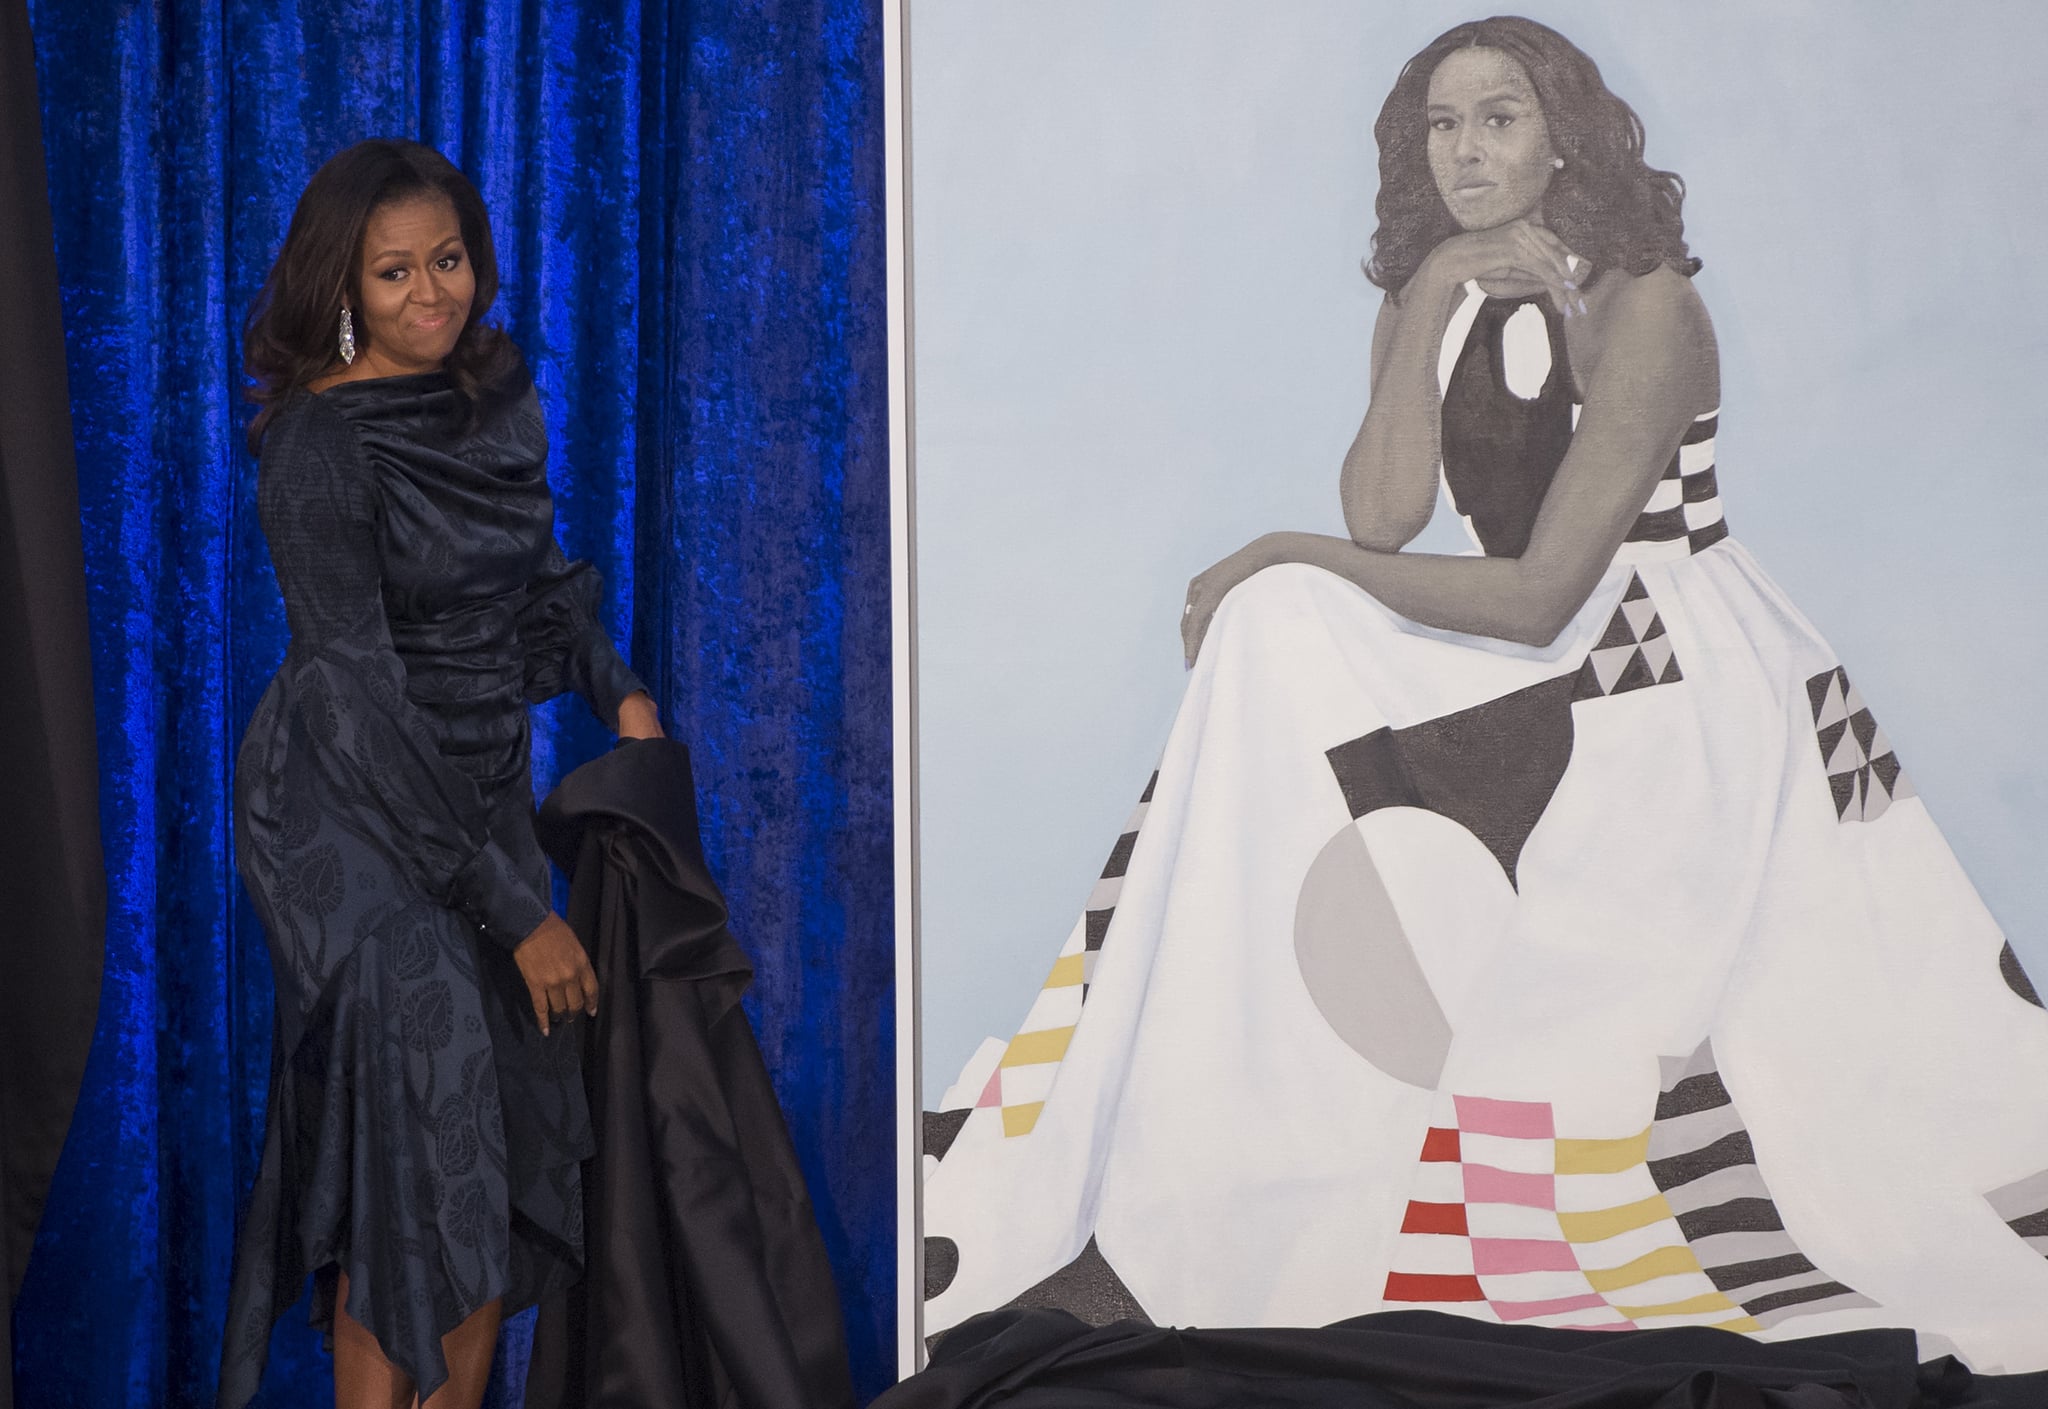 Former US First Lady Michelle Obama unveils her portrait at the Smithsonian's National Portrait Gallery in Washington, DC, February 12, 2018. / AFP PHOTO / SAUL LOEB / RESTRICTED TO EDITORIAL USE - MANDATORY MENTION OF THE ARTIST UPON PUBLICATION - TO ILLUSTRATE THE EVENT AS SPECIFIED IN THE CAPTION        (Photo credit should read SAUL LOEB/AFP/Getty Images)